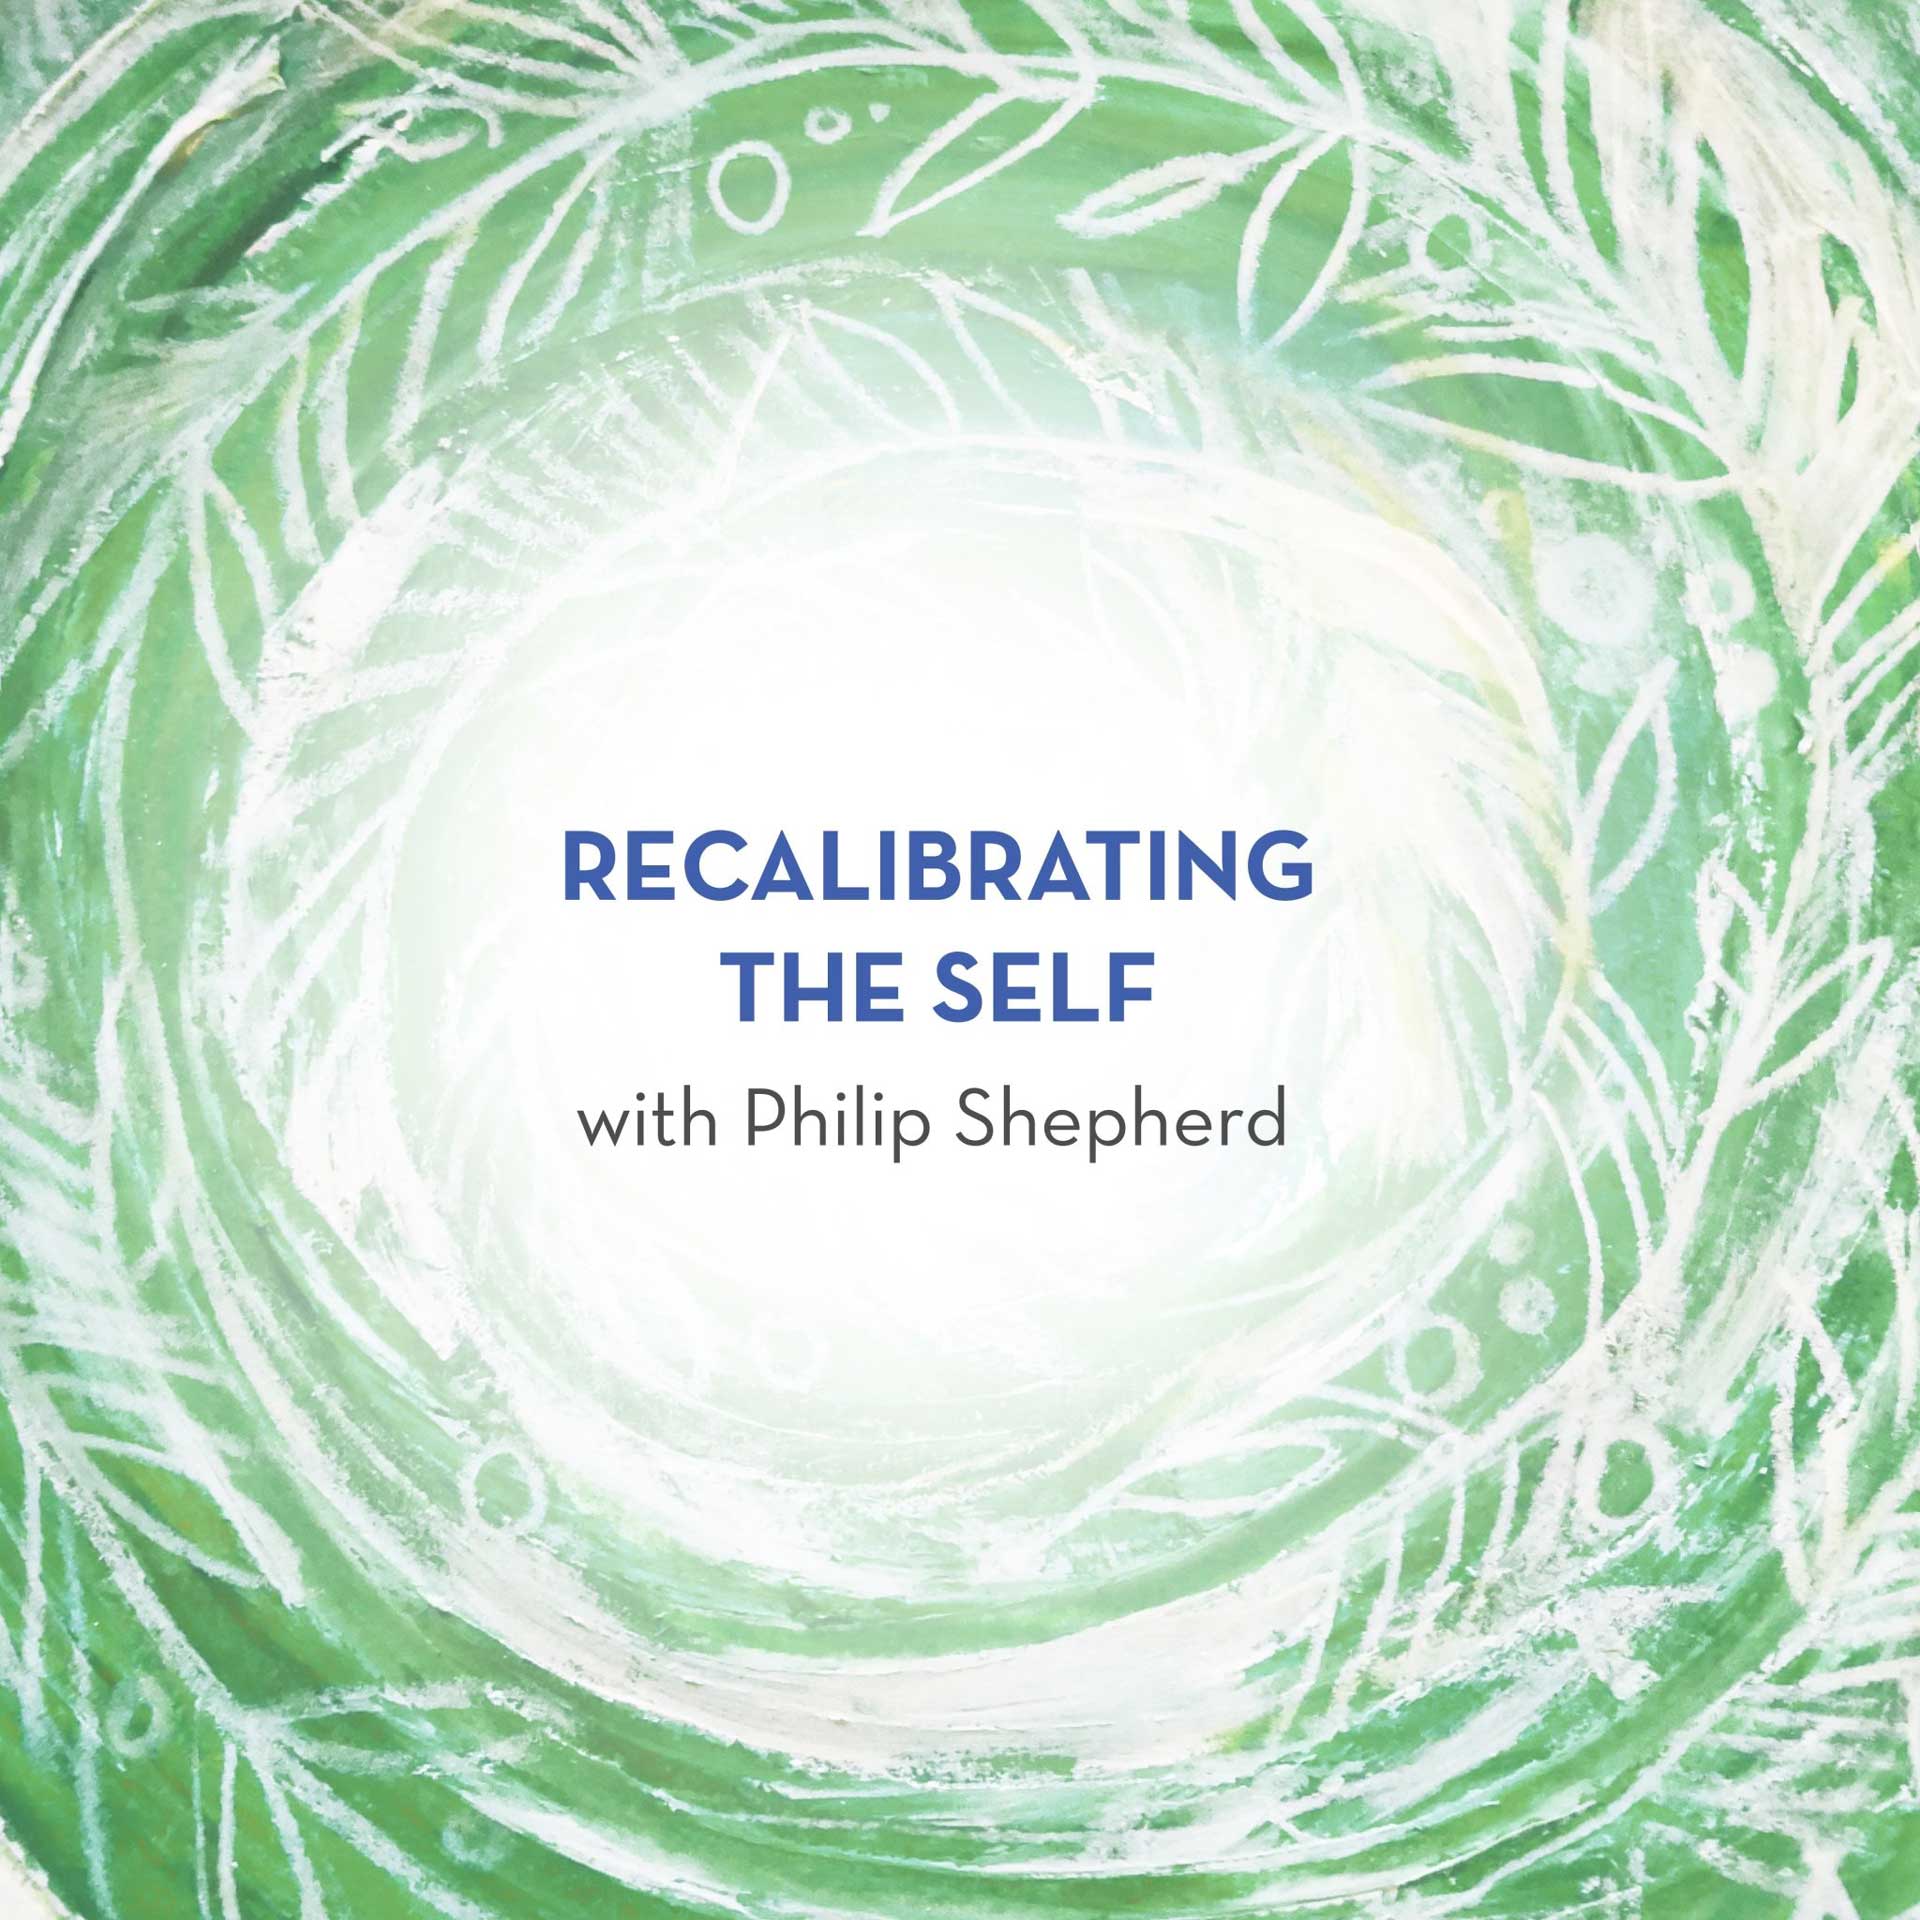 Recalibrating the Self - The Embodied Present Process